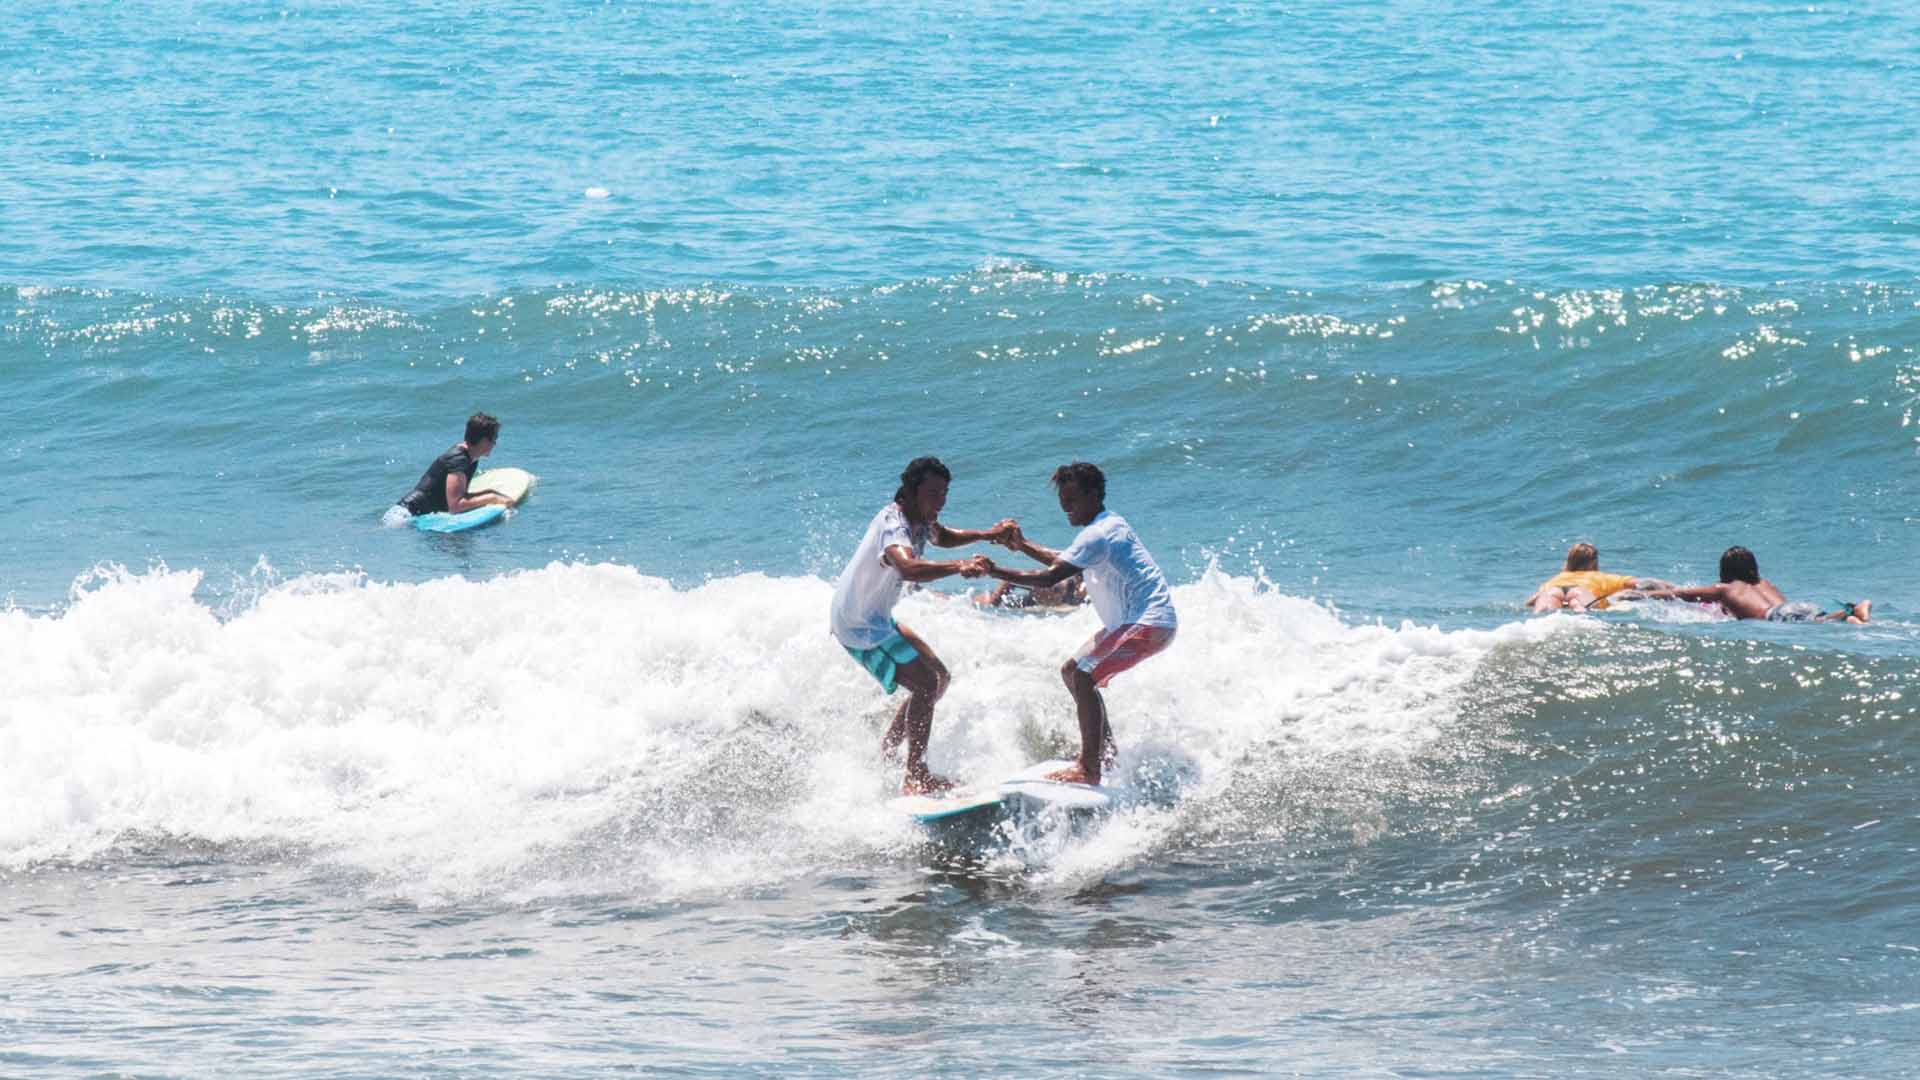 Surfing Bali for Beginners - Your Gateway to Wave Riding Adventure